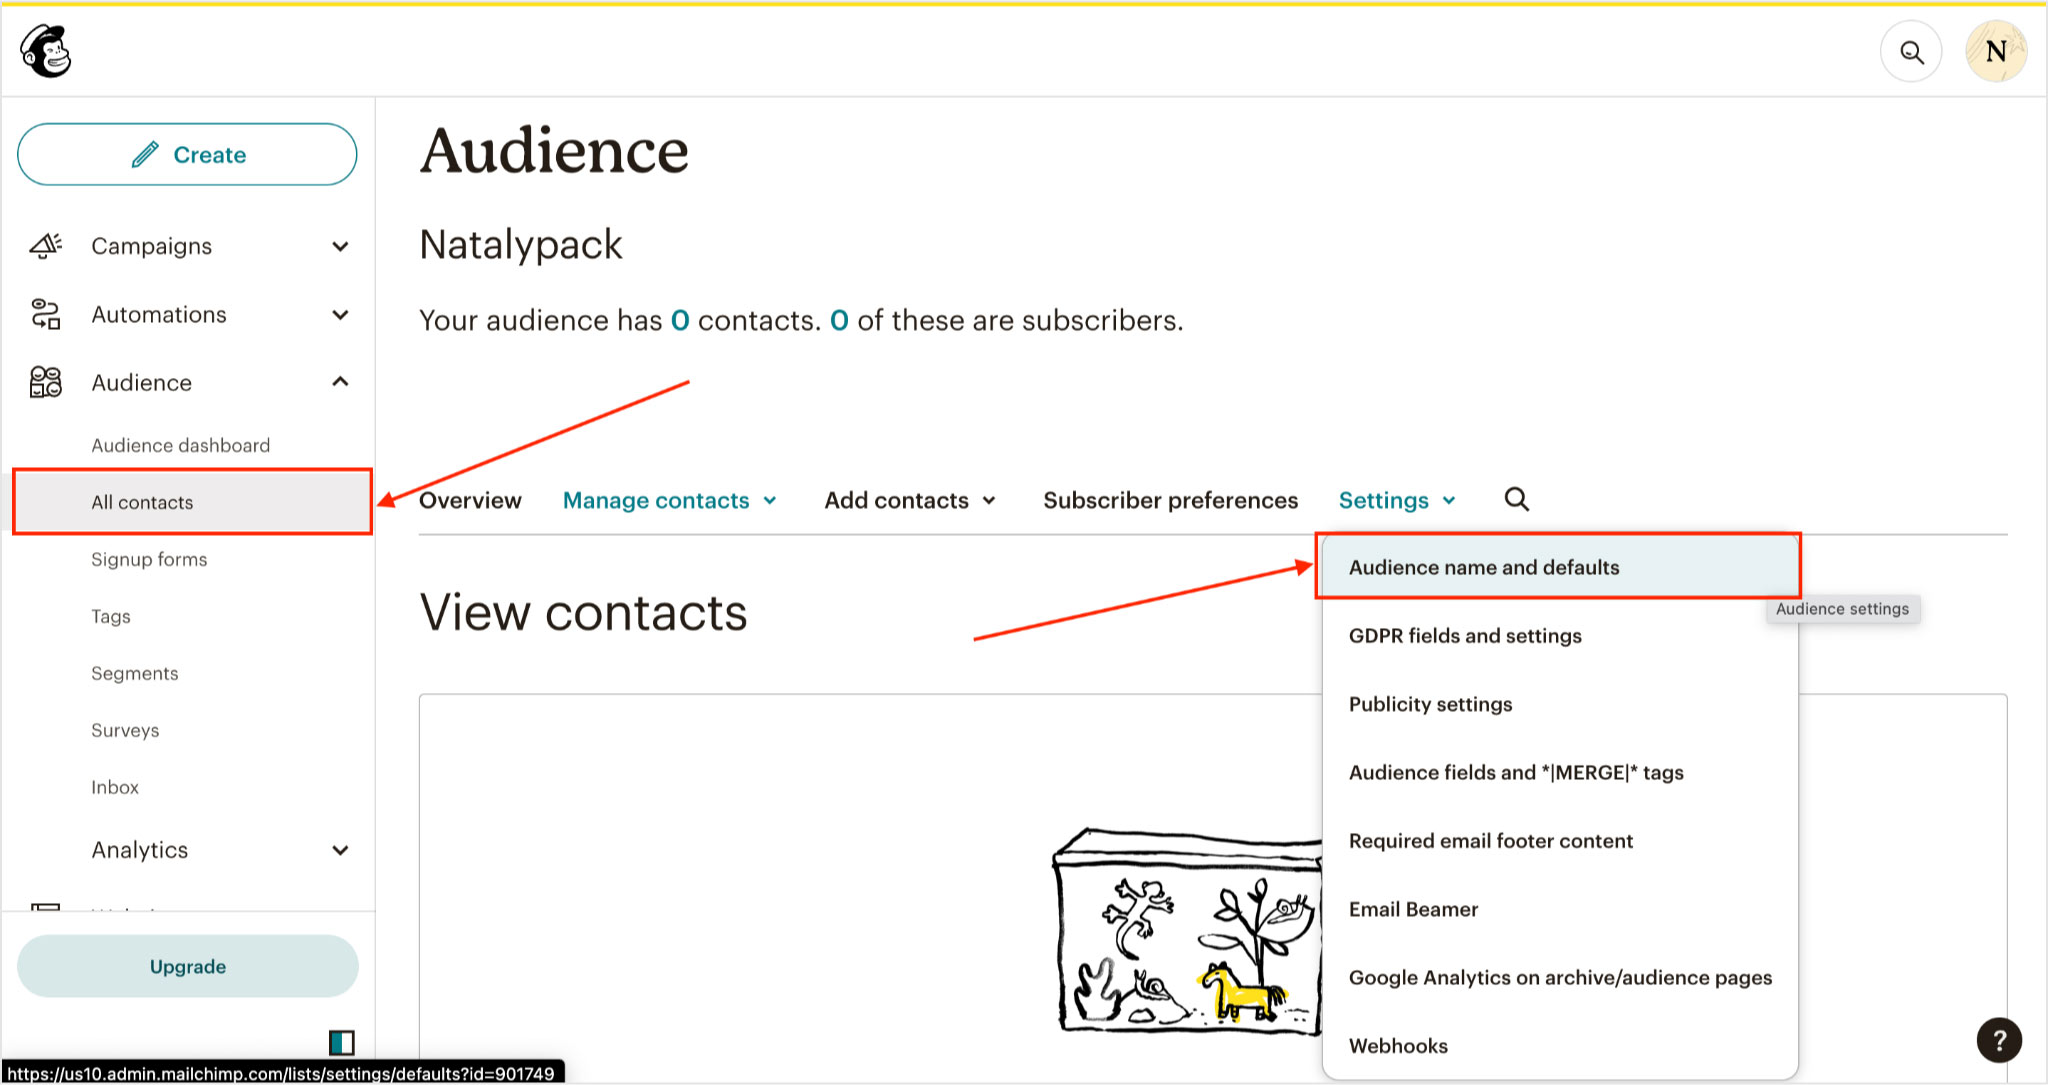 send contacts an opt-in confirmation email when they subscribe to your audience